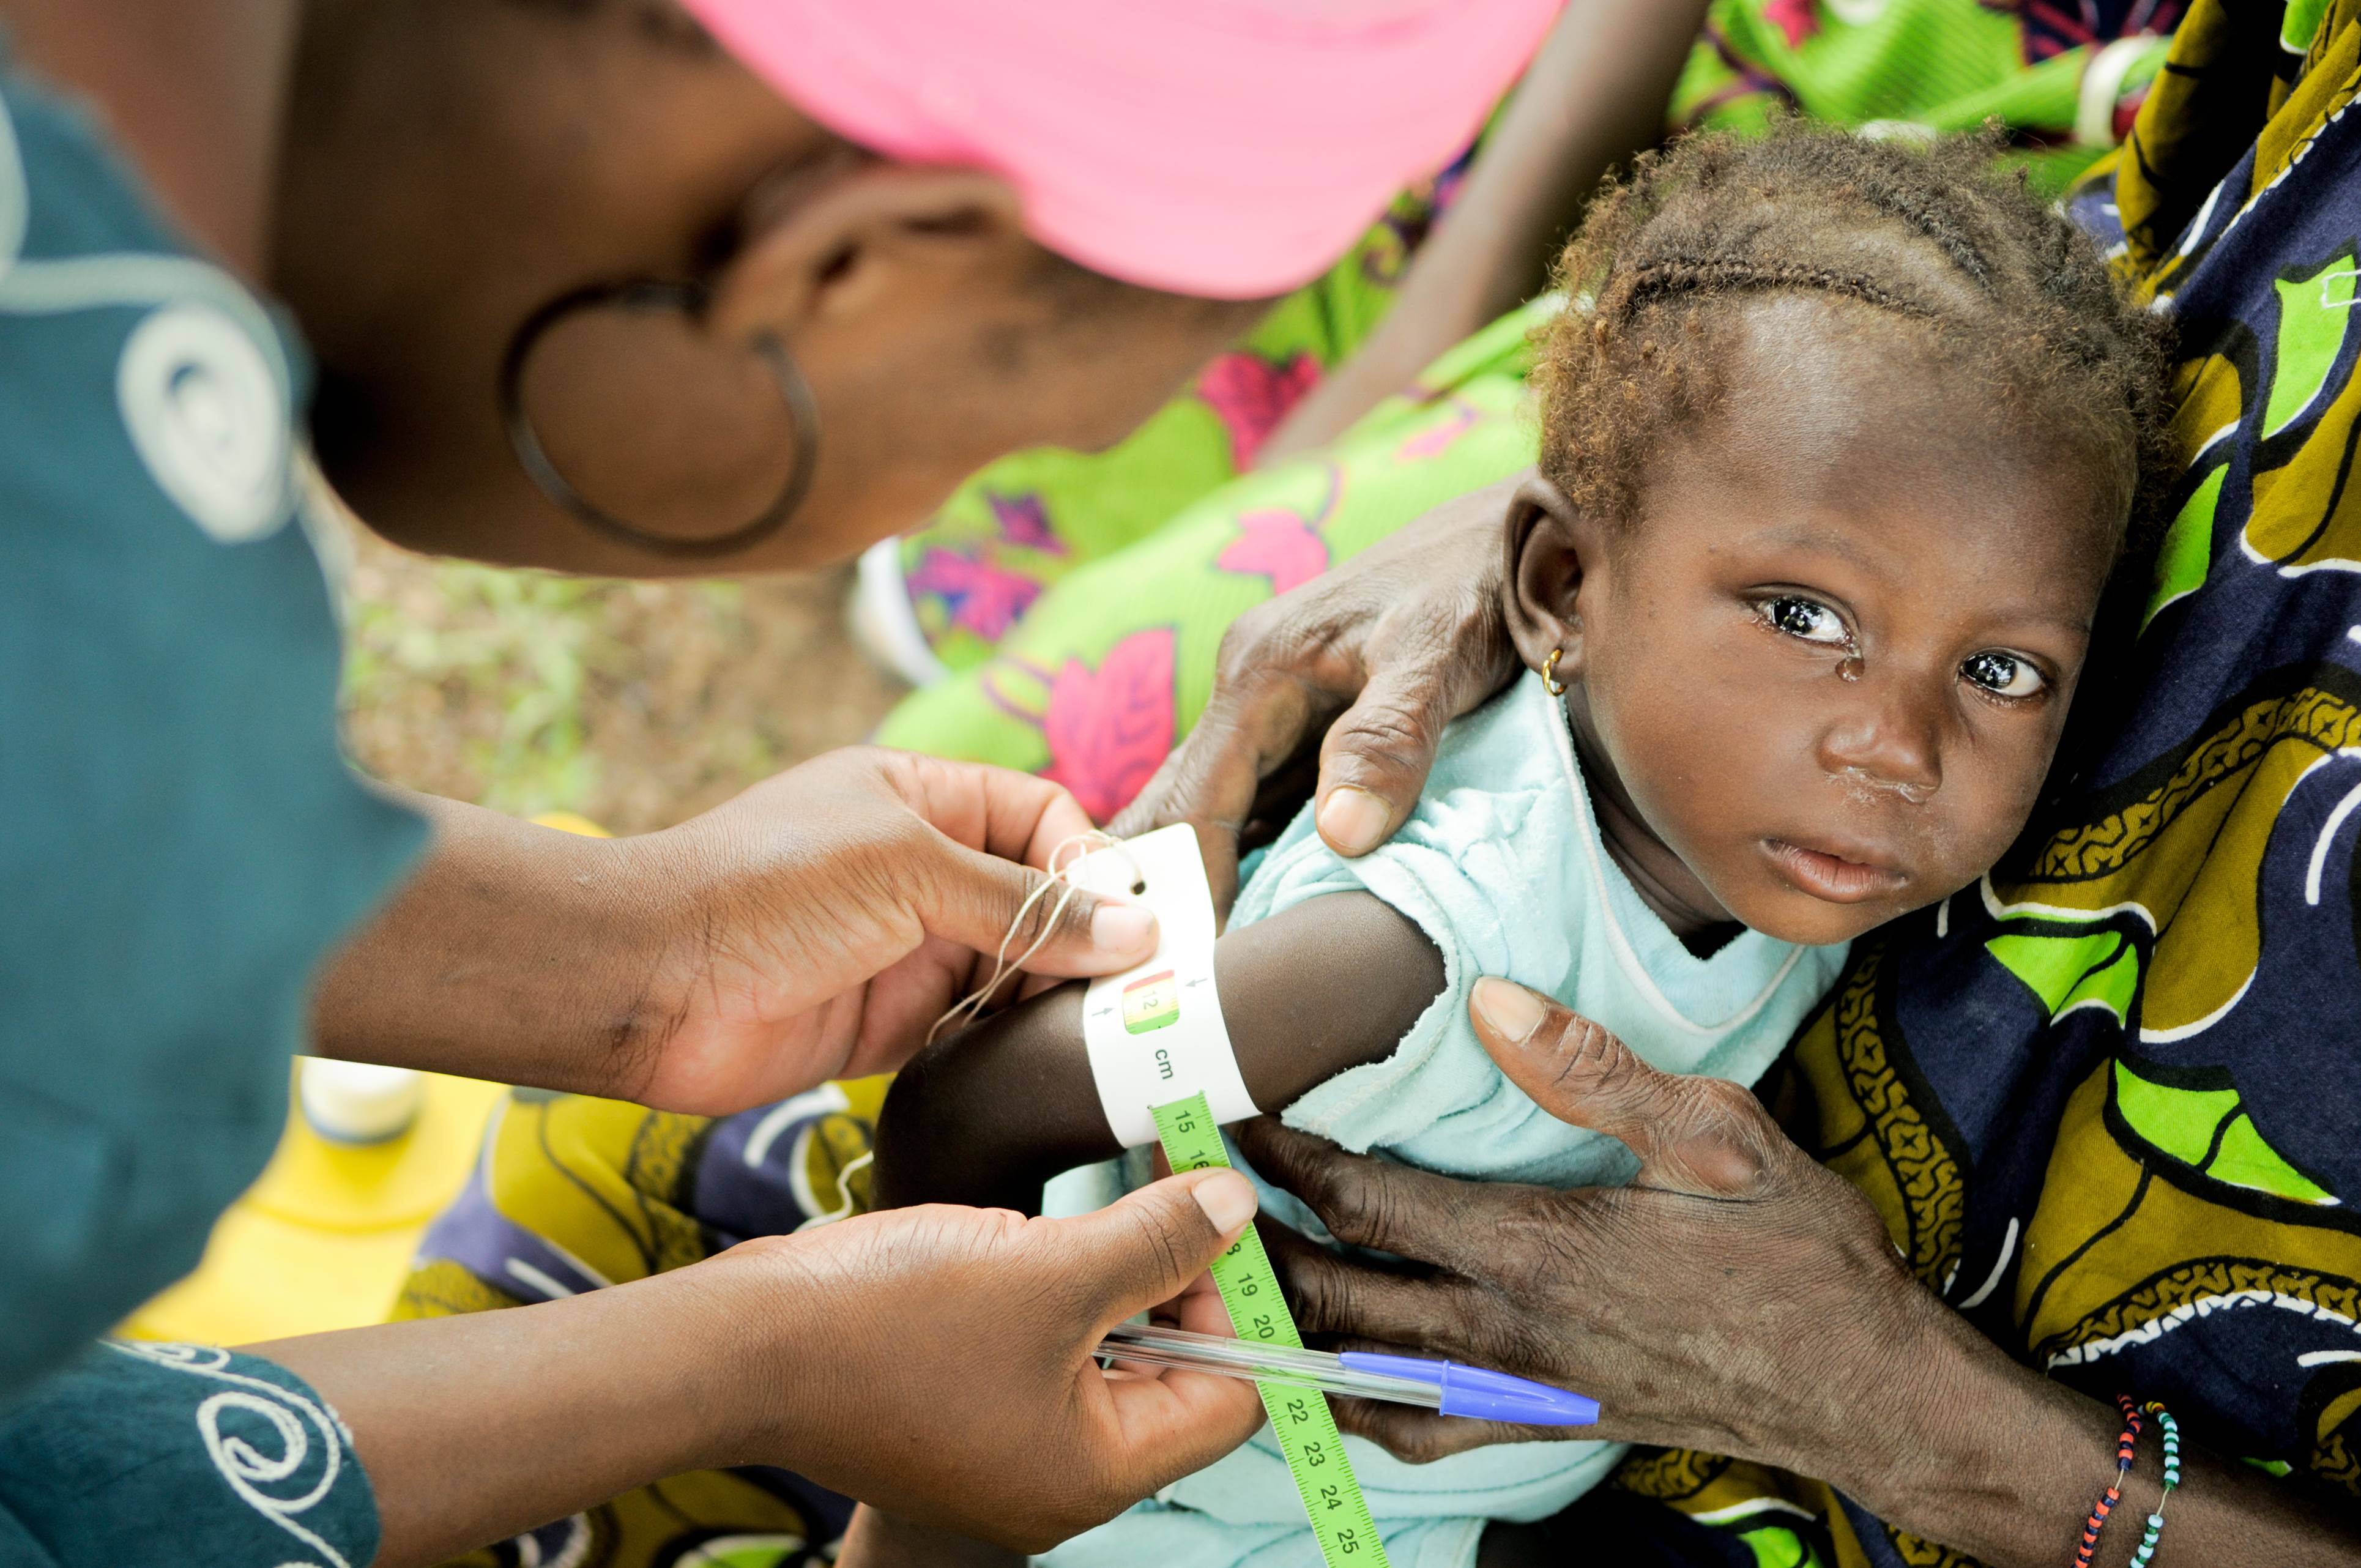 A young child has their upper arm measured to check for signs of malnutrition